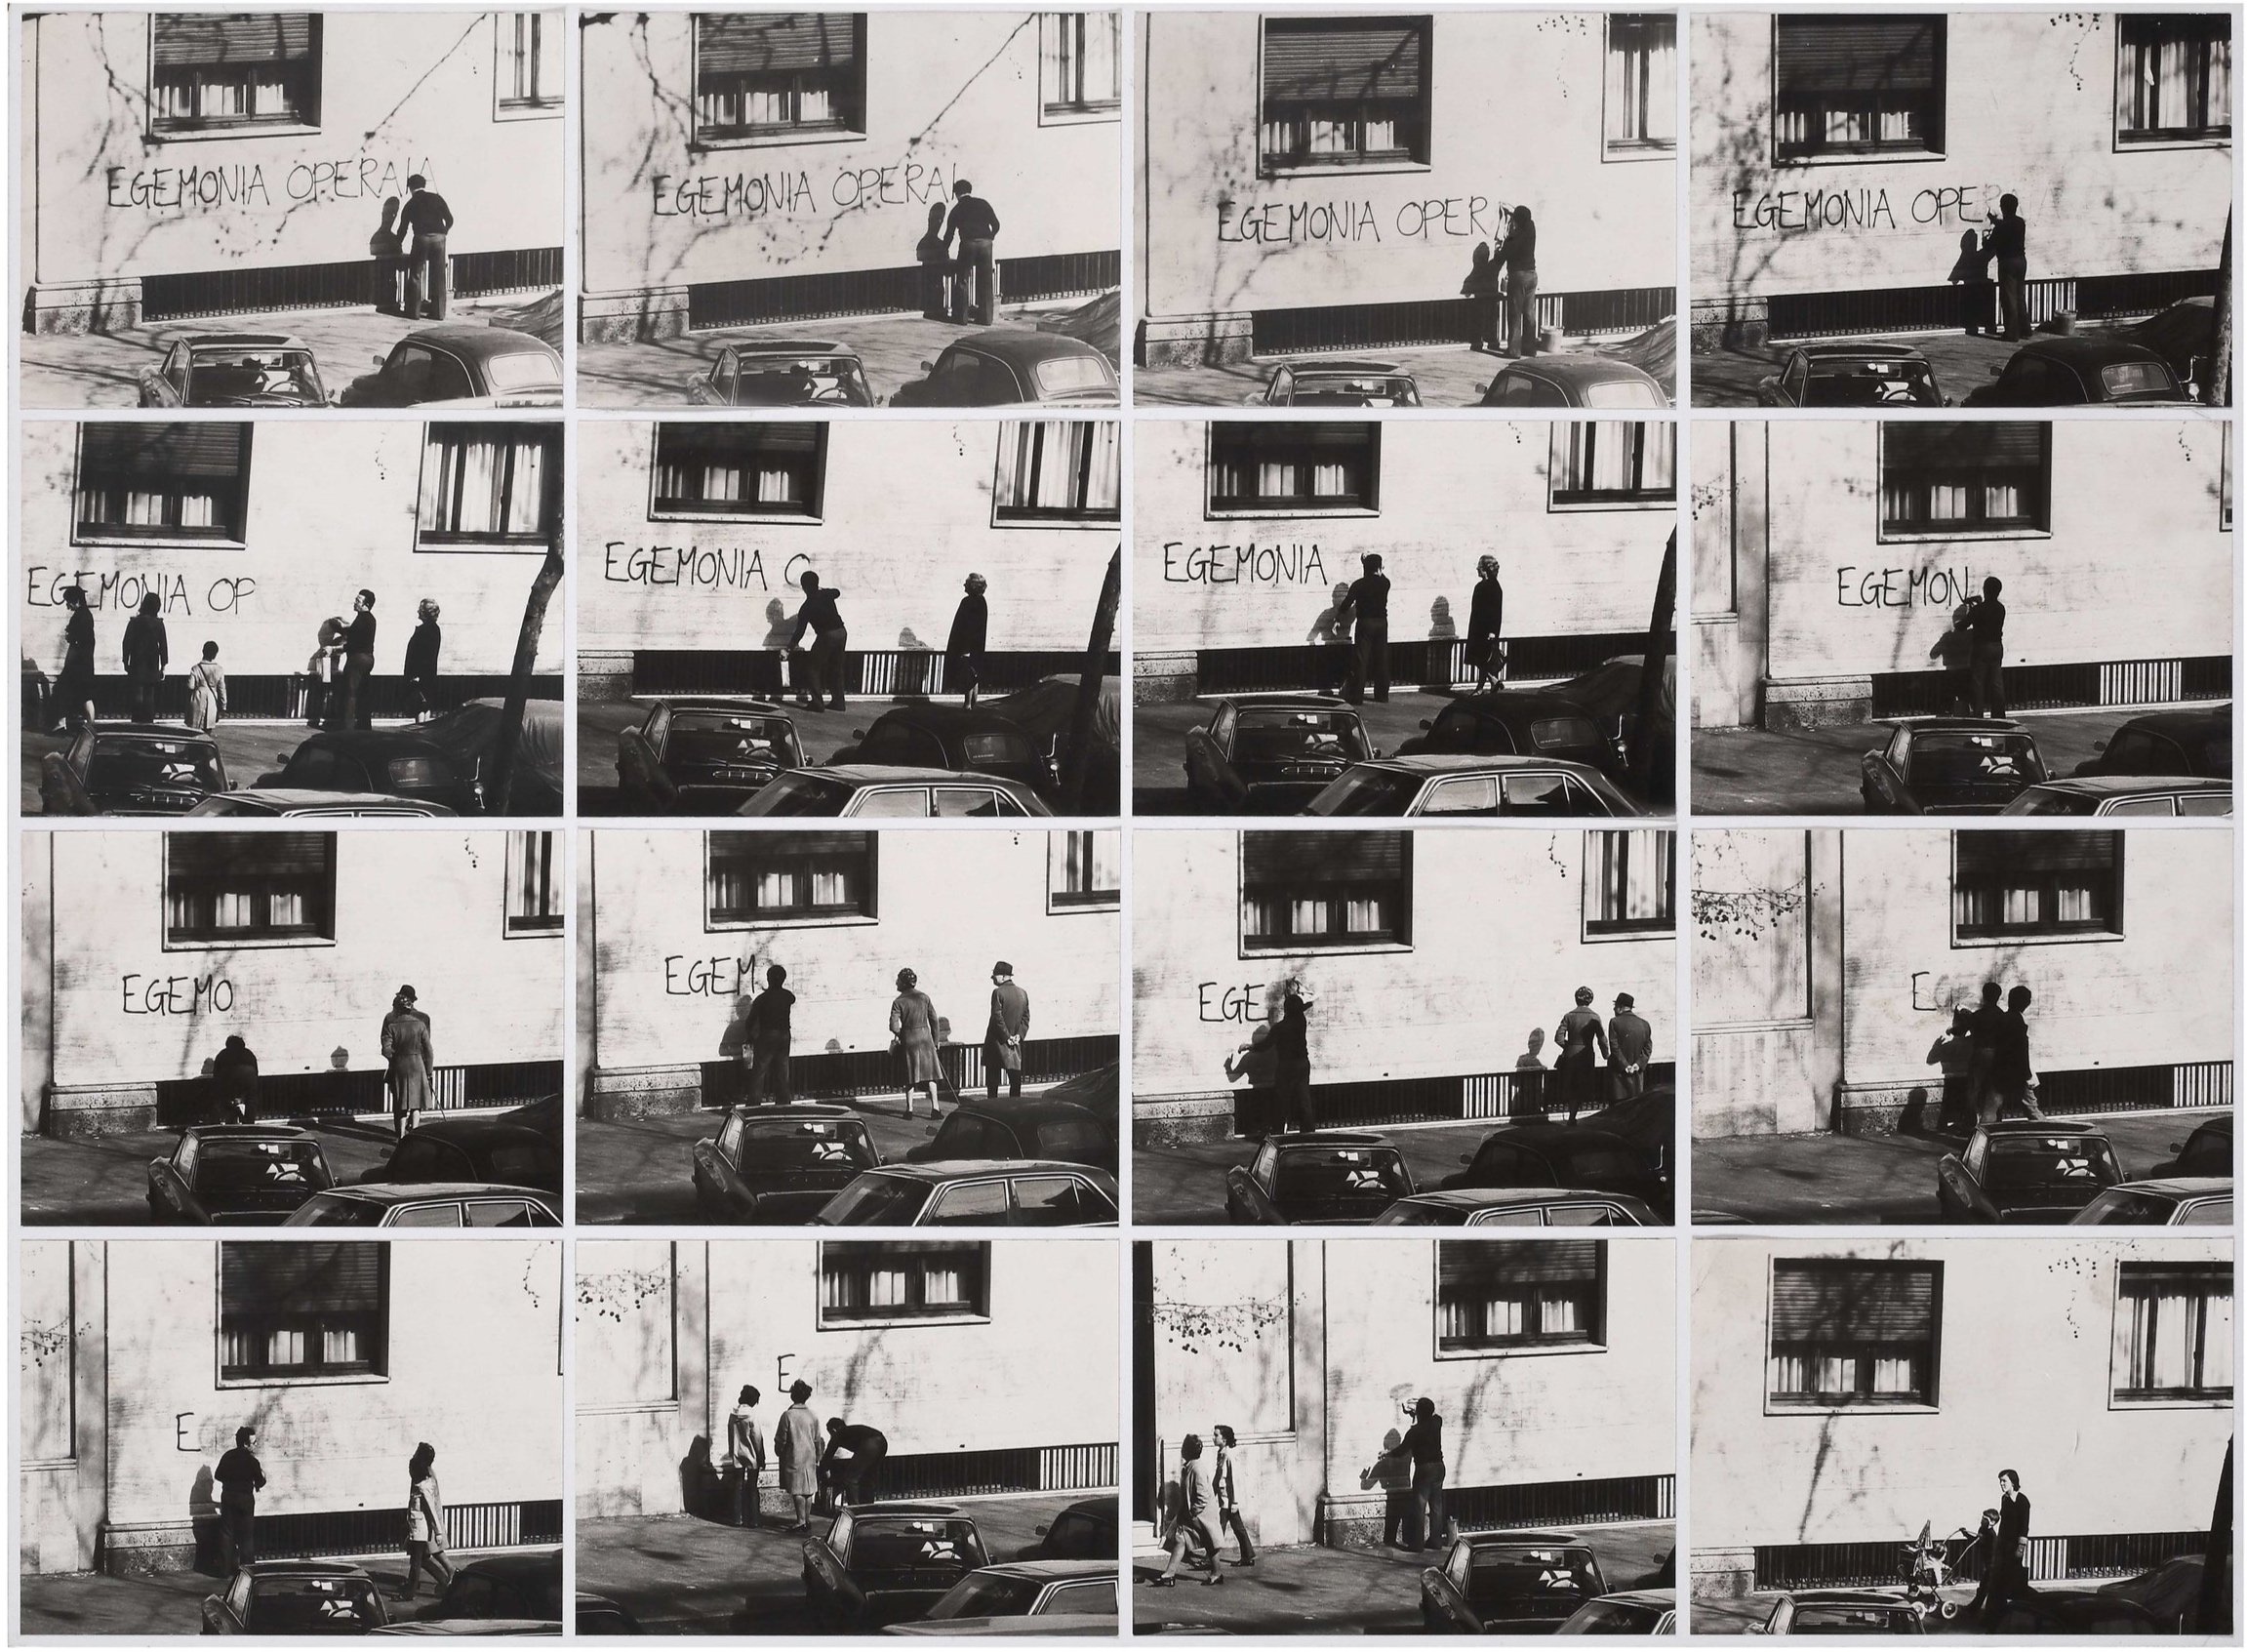 Workers Hegemony (with F.Balladore) 1977
2 panels of photomechanical prin